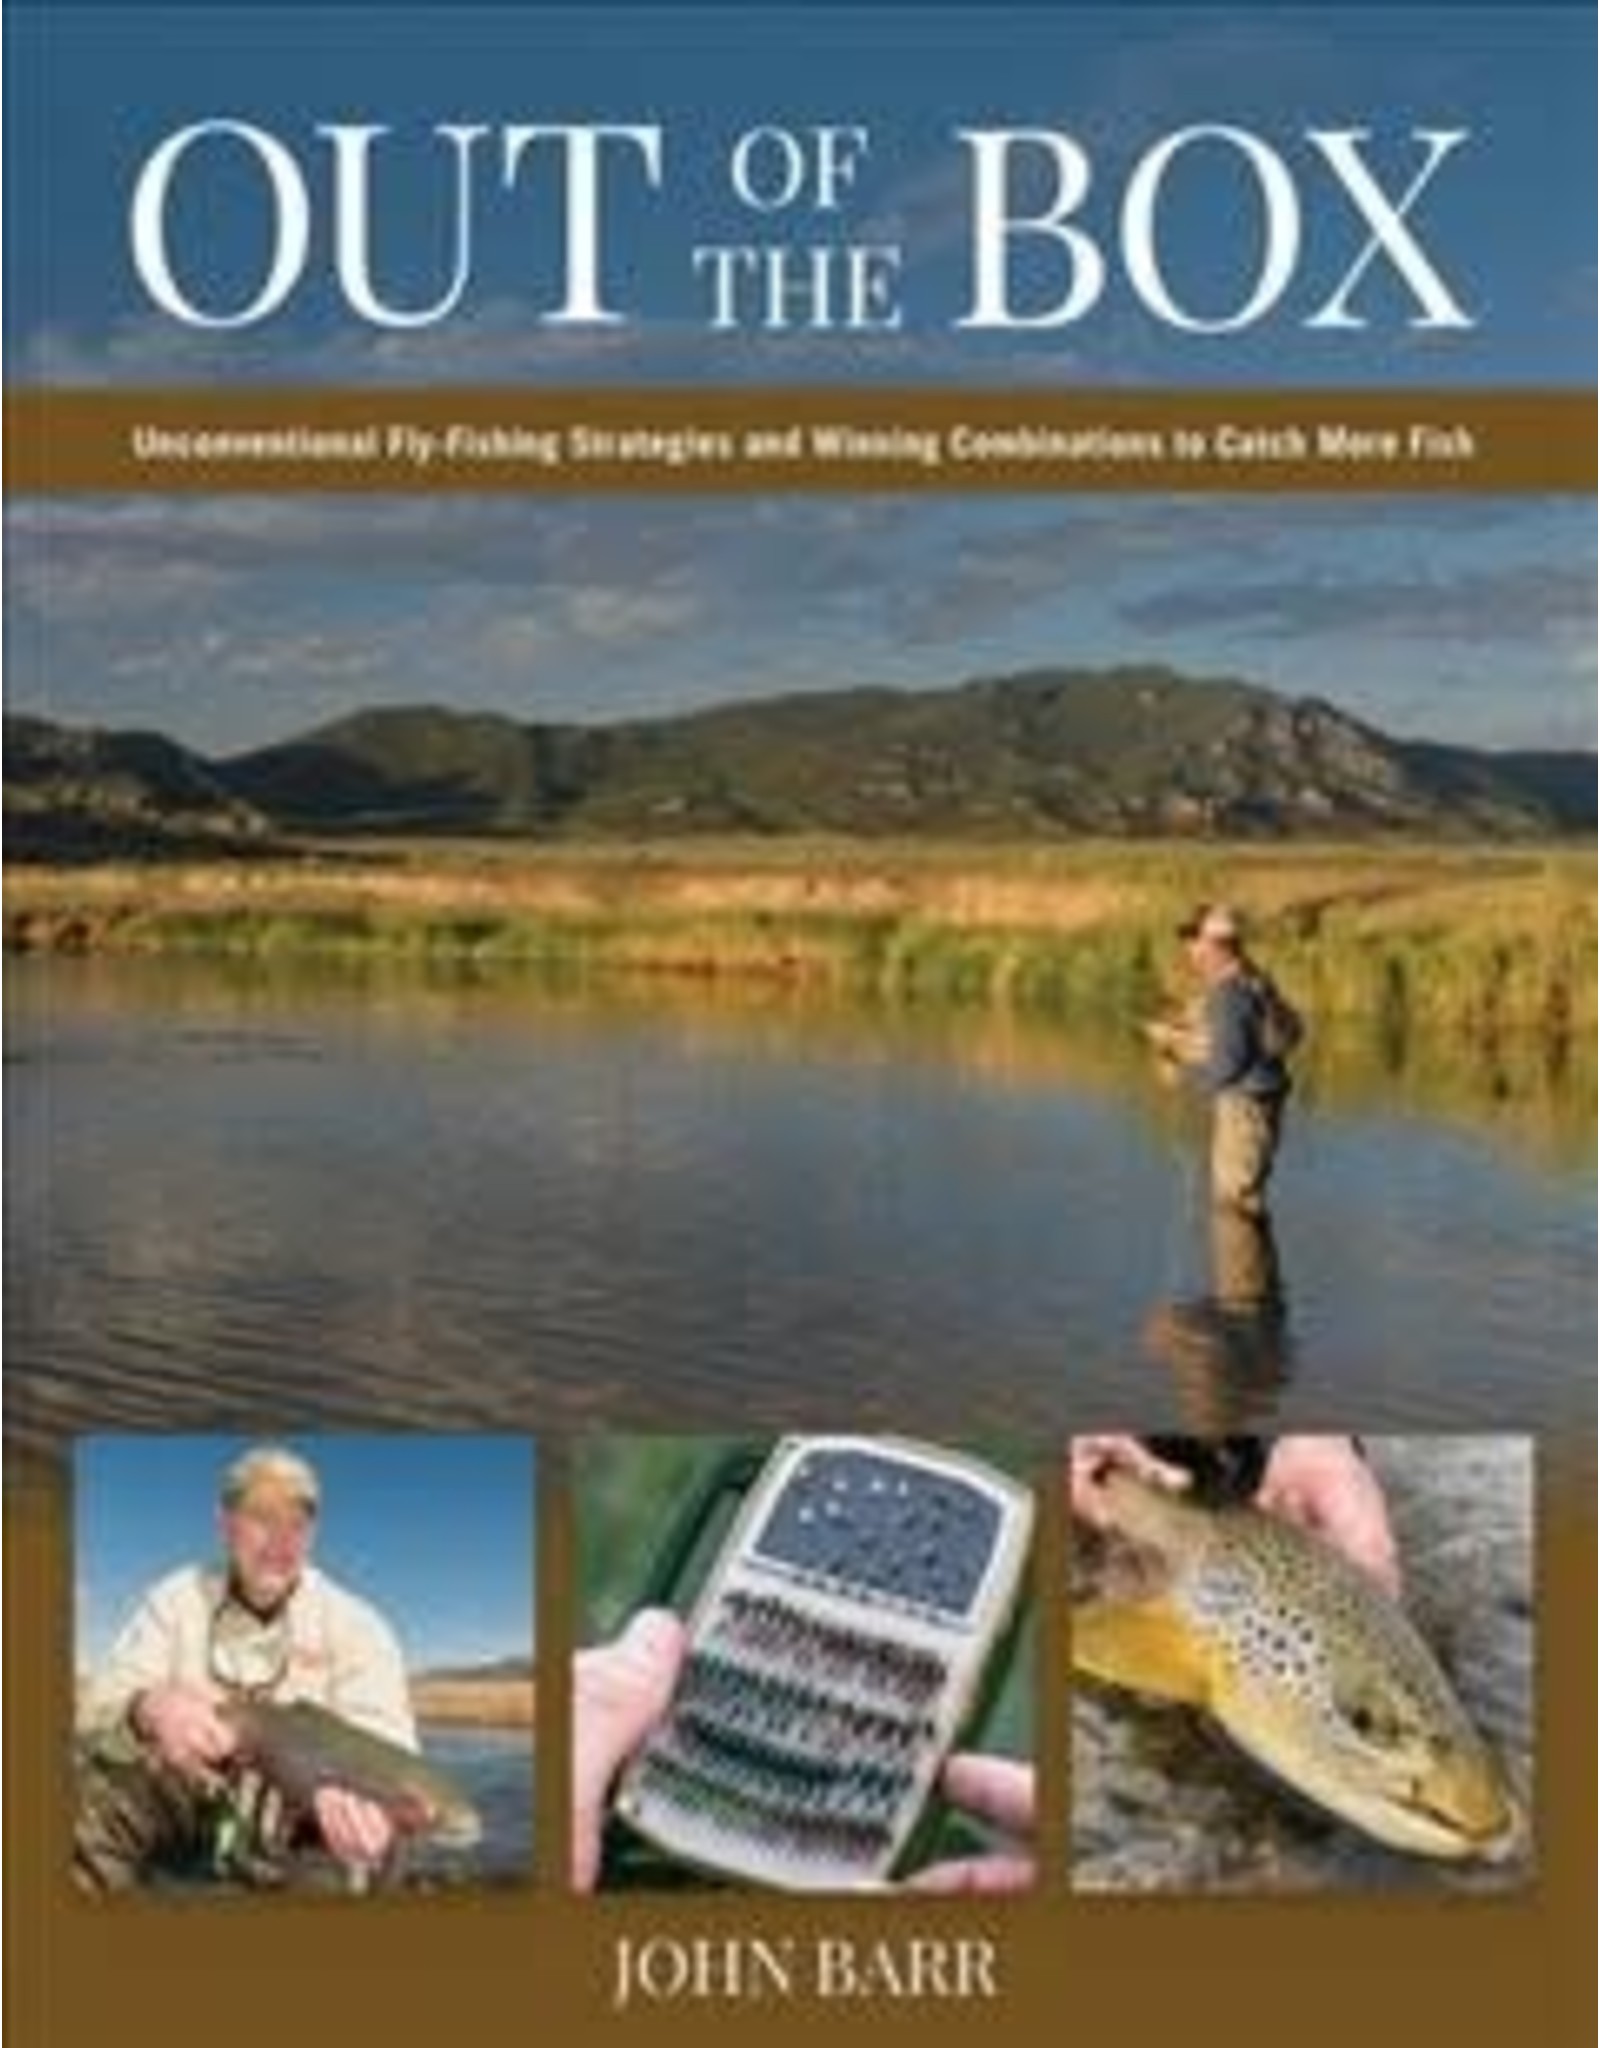 Books Out of the Box - Unconventional Fly-Fishing Strategies and Winning Combinations to Catch More Fish